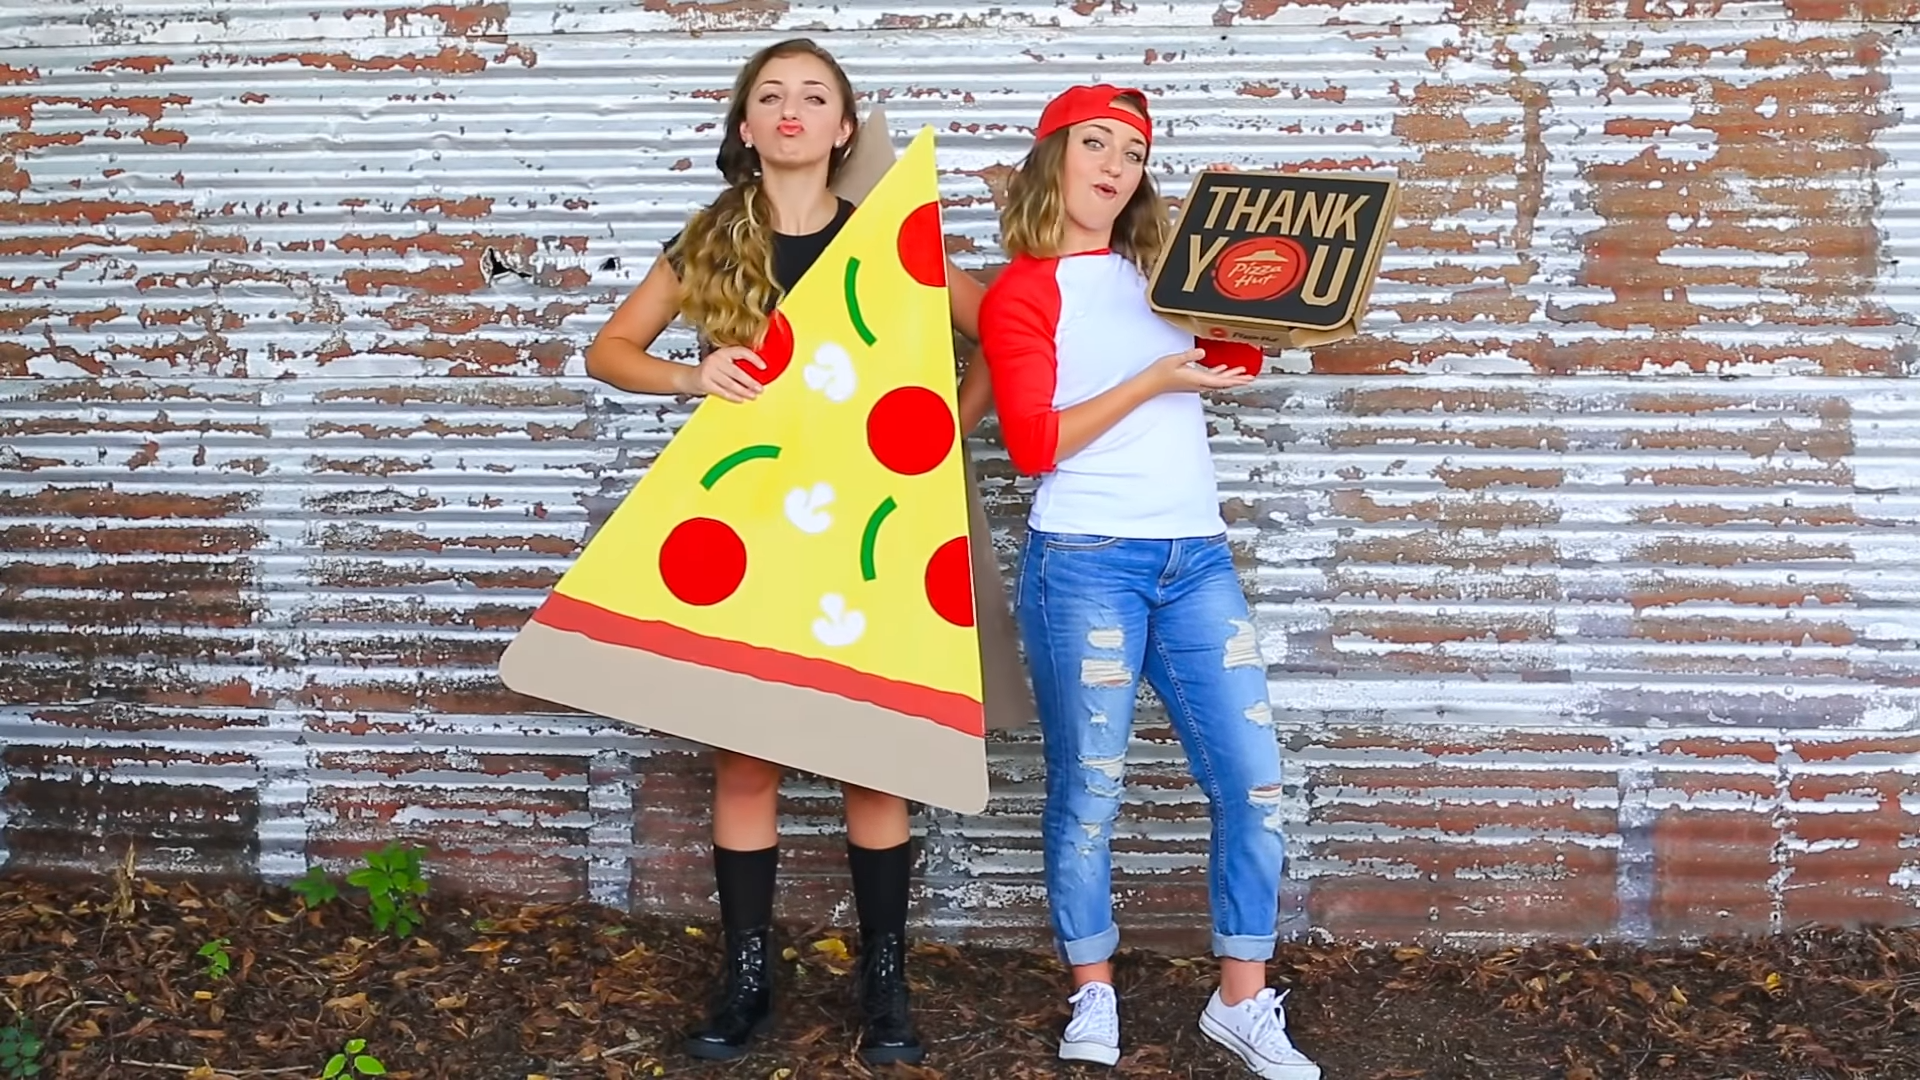 Halloween Costume Ideas for Best Friends or Couples